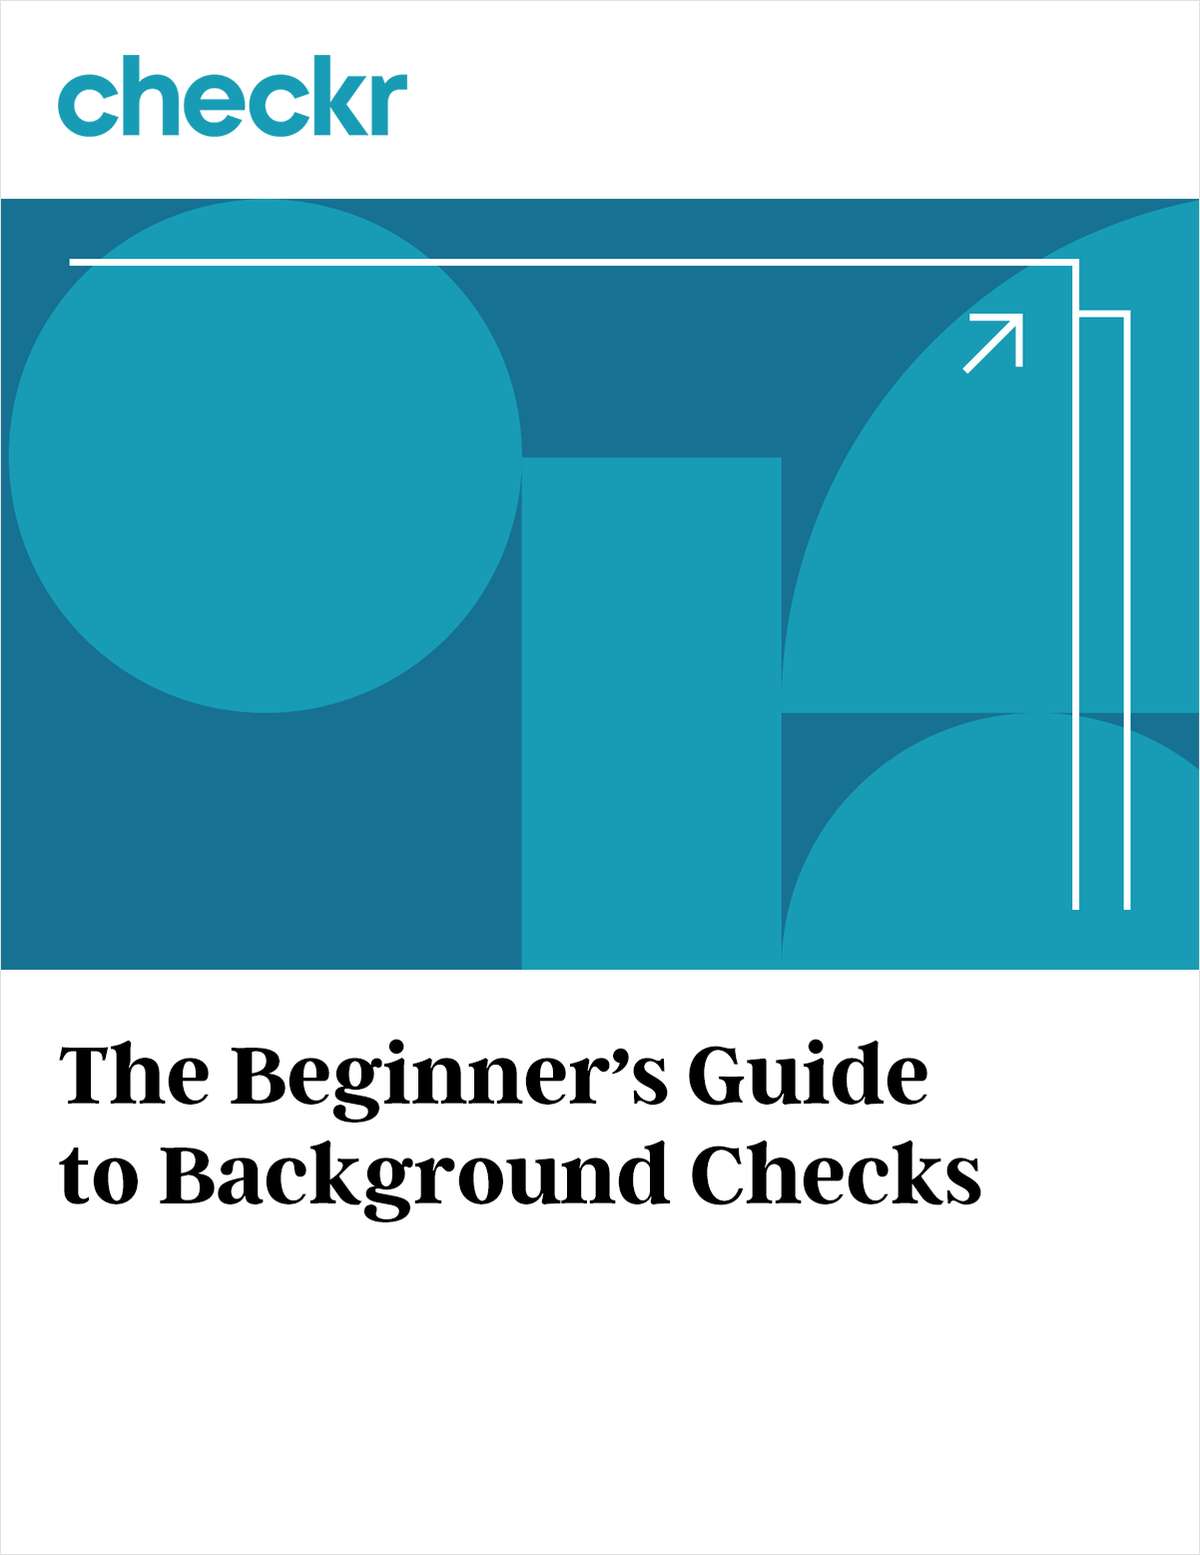 The Beginner's Guide to Background Checks